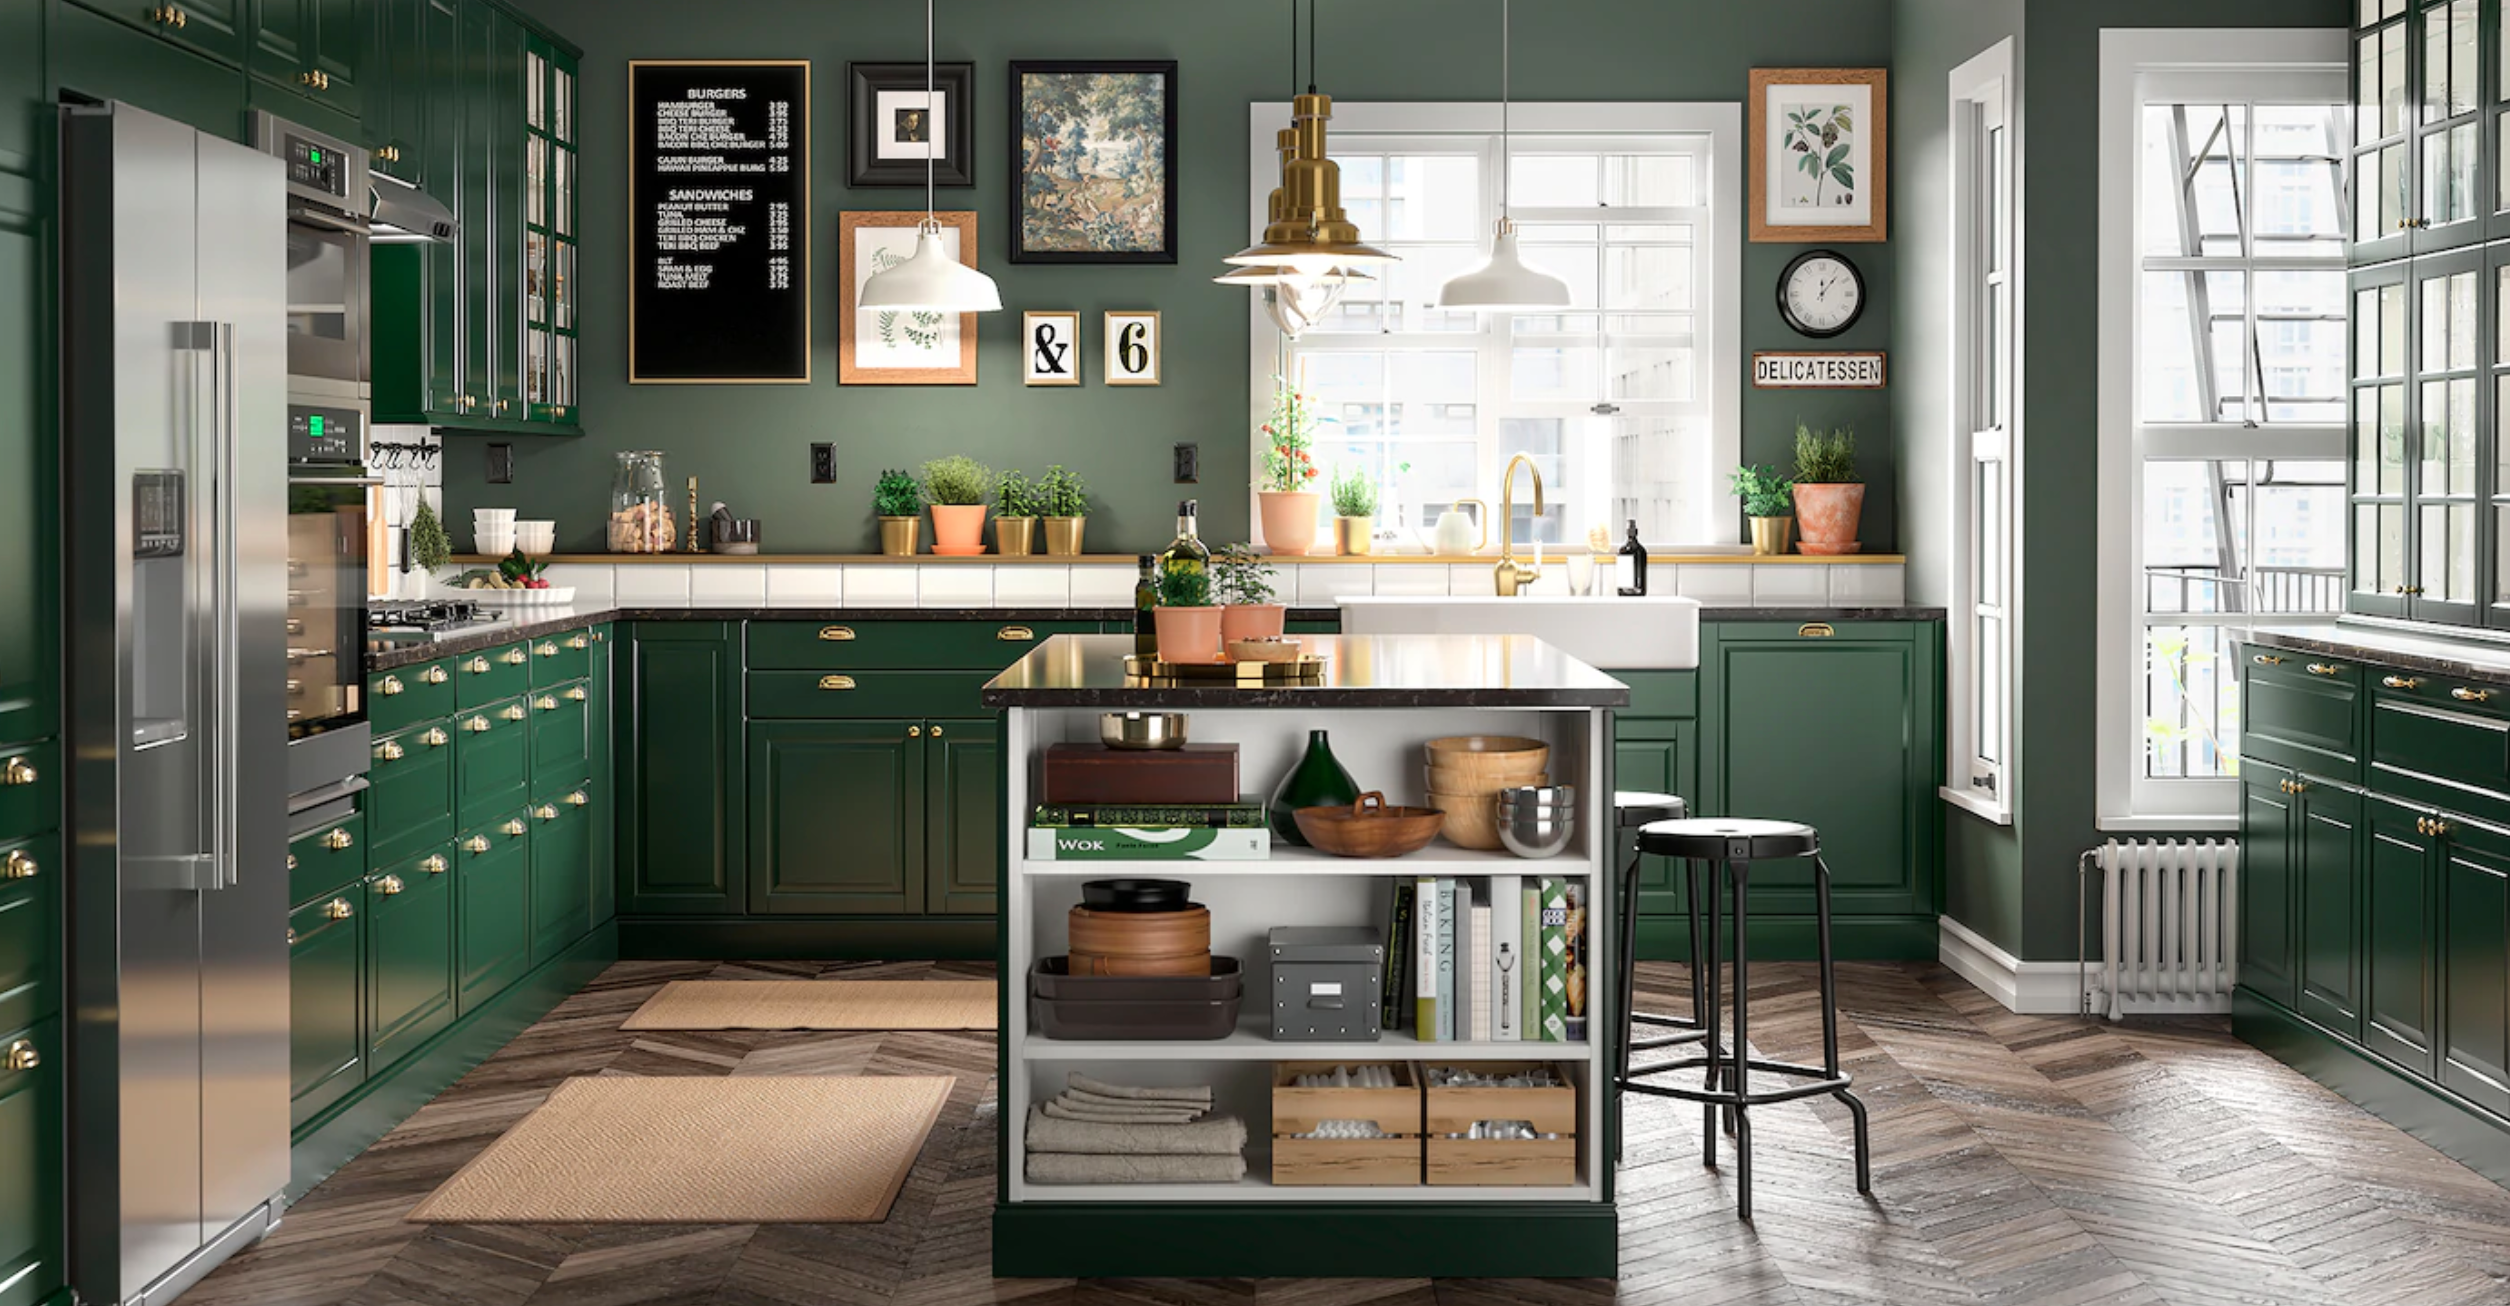 IKEA kitchen image taken with 3D product photography